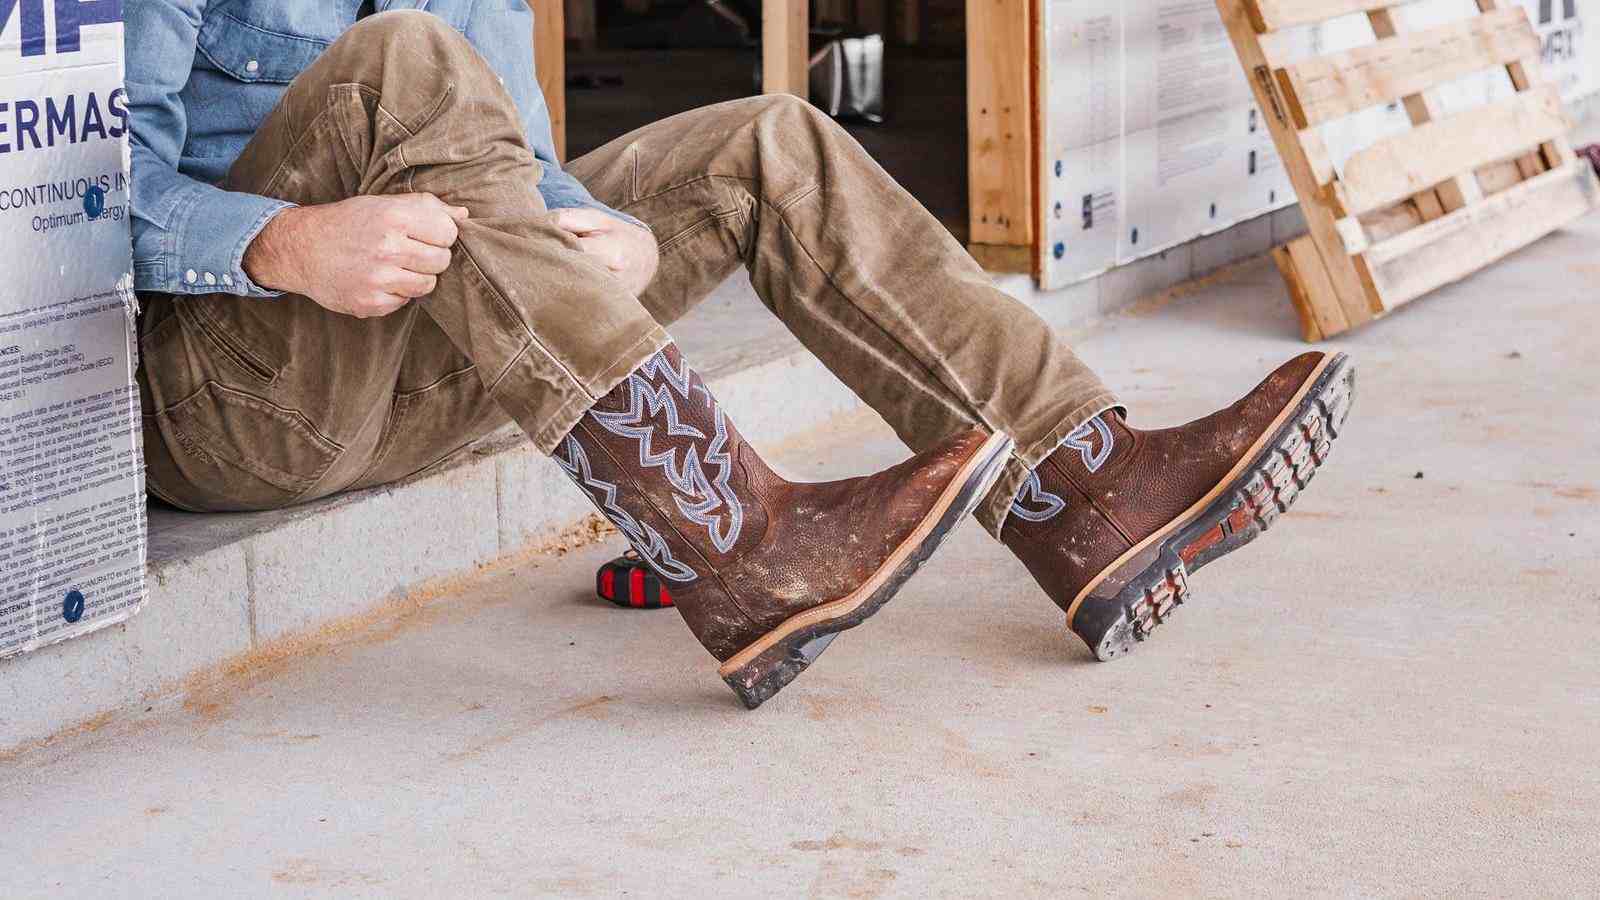 Twisted X®  Are Cowboy Boots Good for Working?